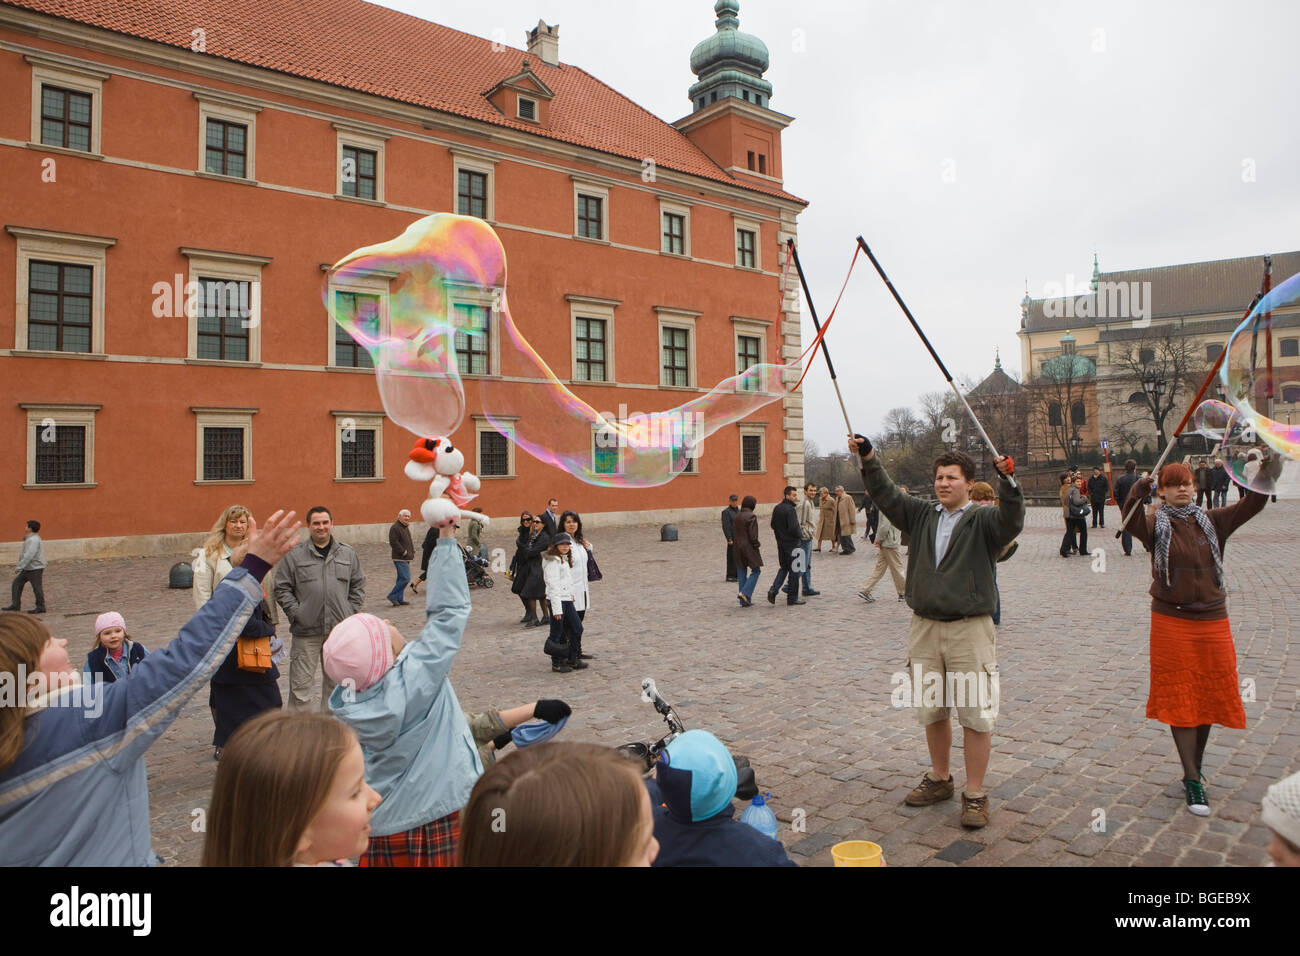 Children jumping towards a large soap bubble in a market square. Warsaw, Poland. Stock Photo